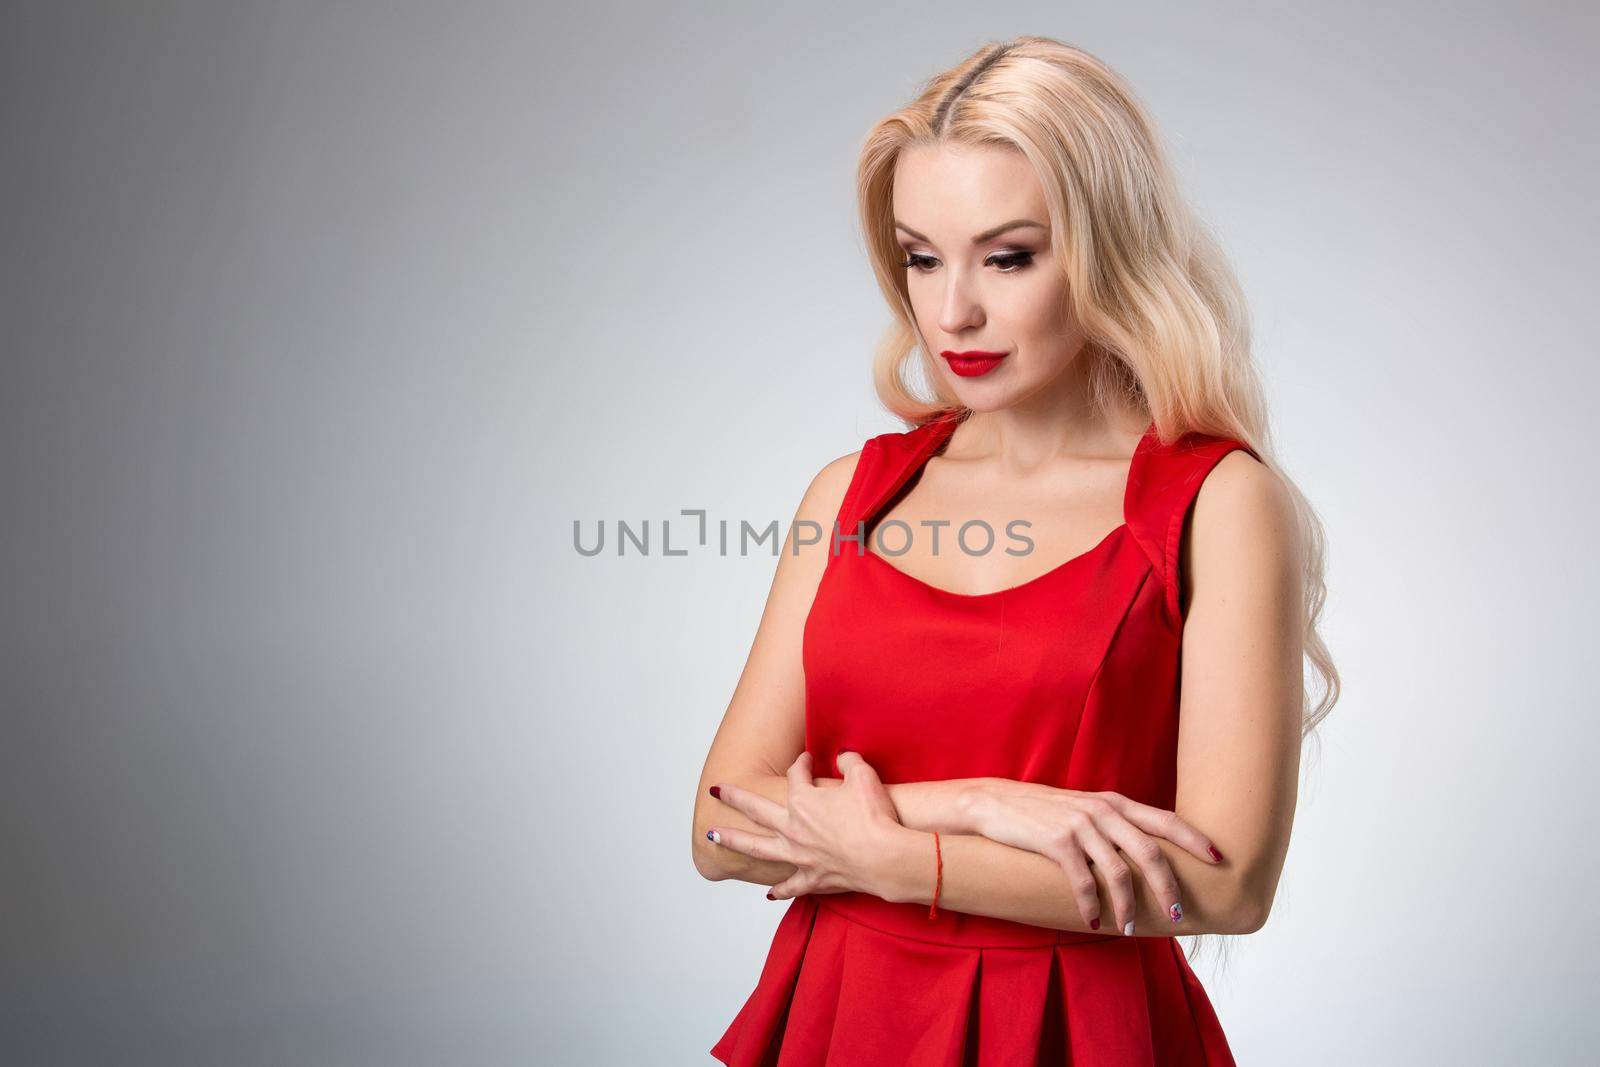 Glamorous young woman in red dress on gray background.